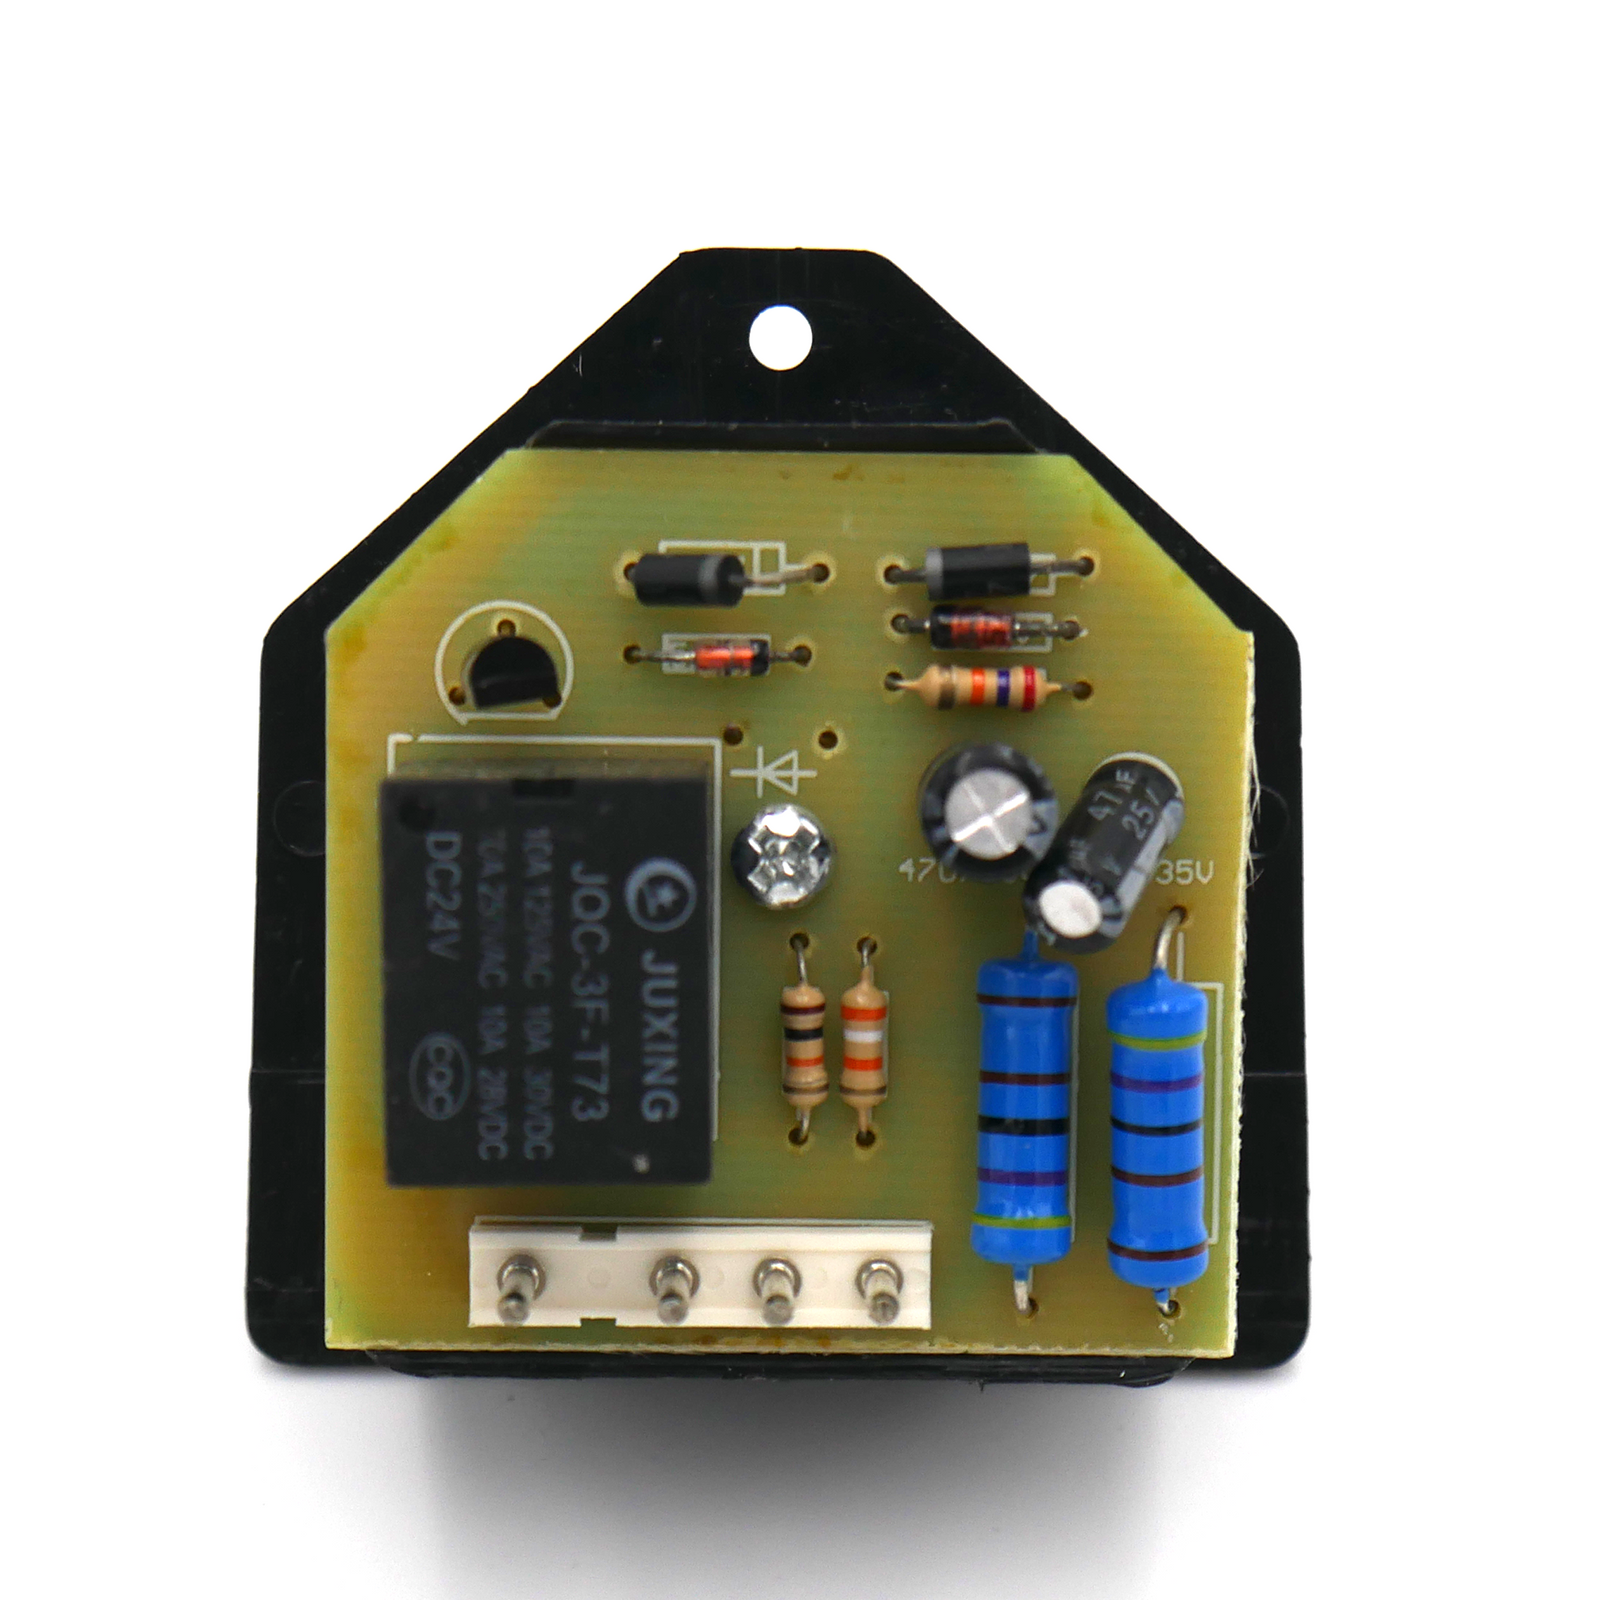 Timer circuit board with numbers from 1 to 8 for a JORES TECHNOLOGIES manual impulse sealer